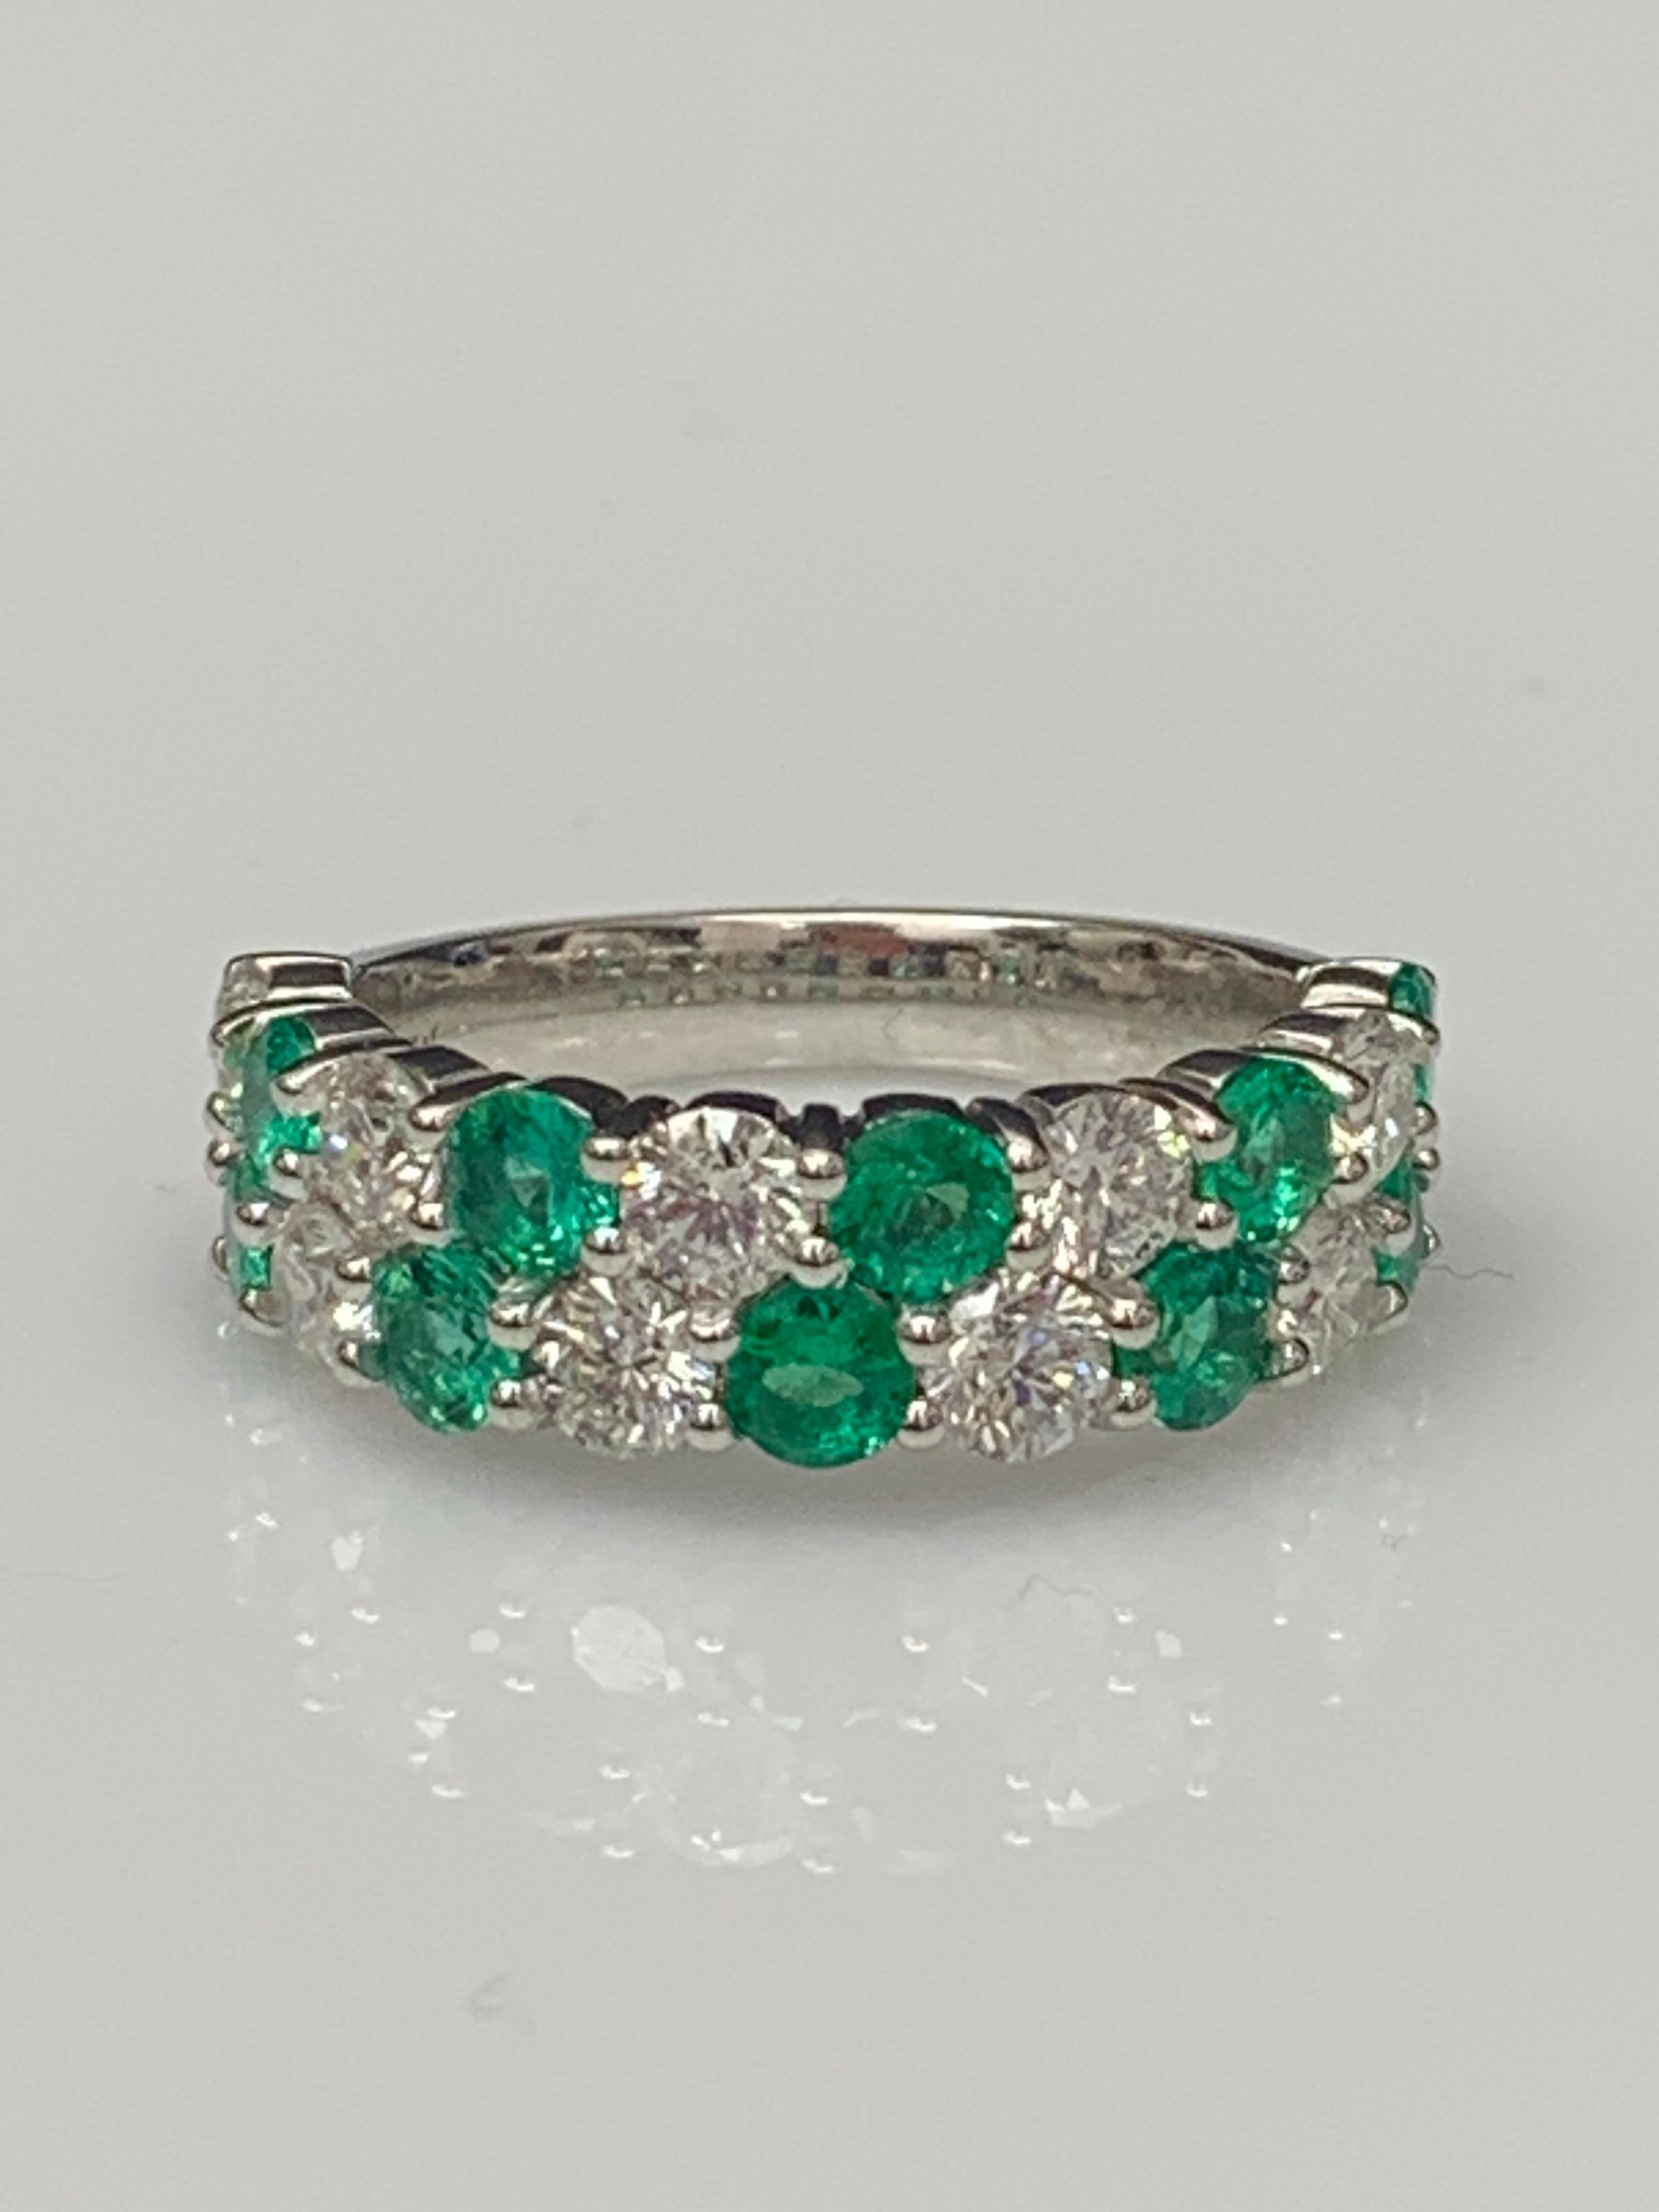 A unique and fashionable ZicZac ring showcasing two rows of round-shape 10 emerald and 9 diamonds, set in a band design. Emerald weighs 1.08 carats and Diamonds weigh 1.52 carats total. A brilliant and masterfully-made piece.

Style available in